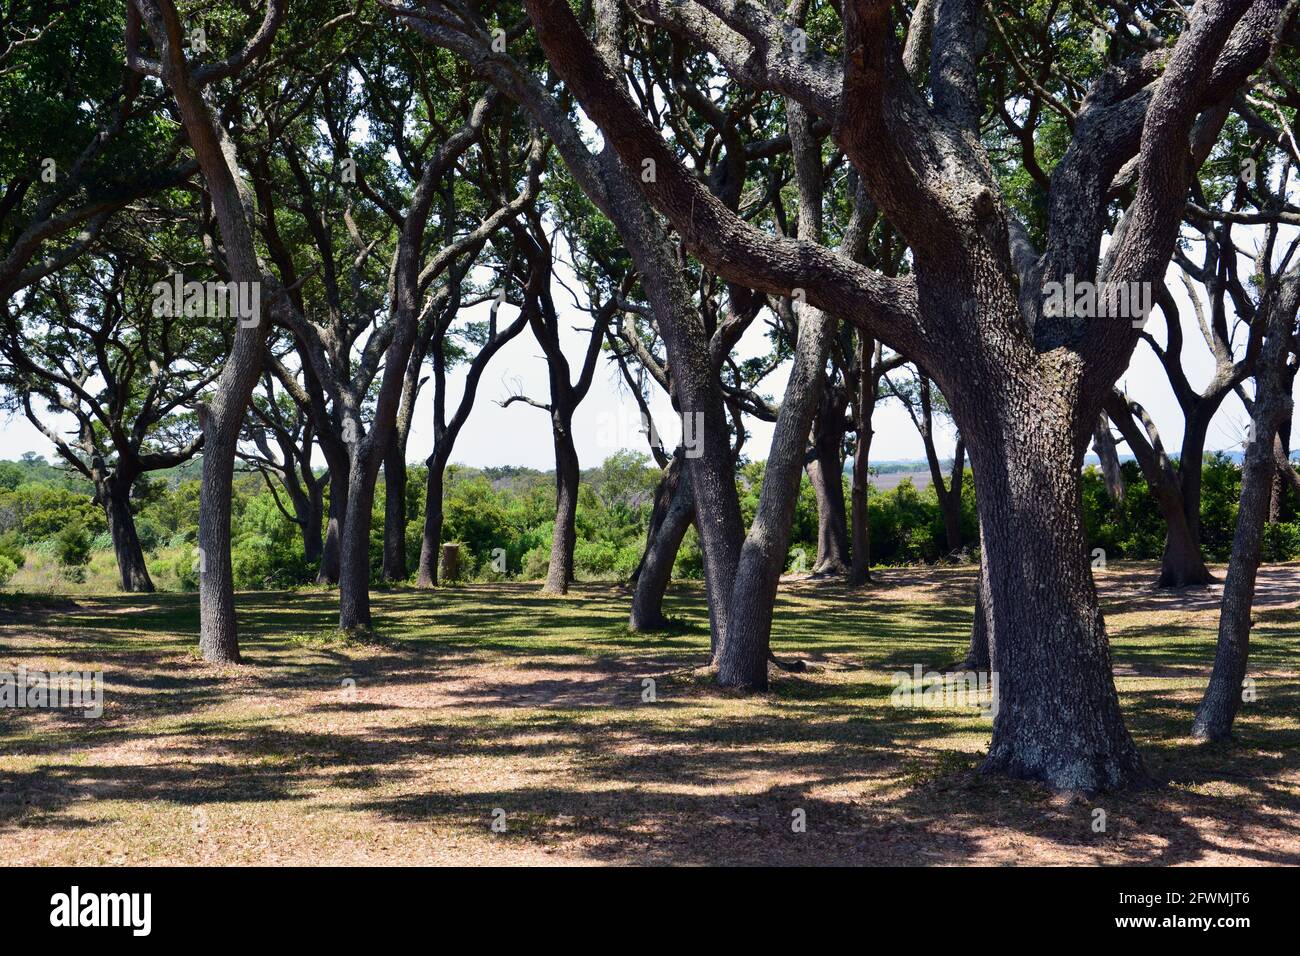 The gnarled forms of scrub live oak trees on the coast at Fort Fisher near Wilmington, North Carolina. Stock Photo